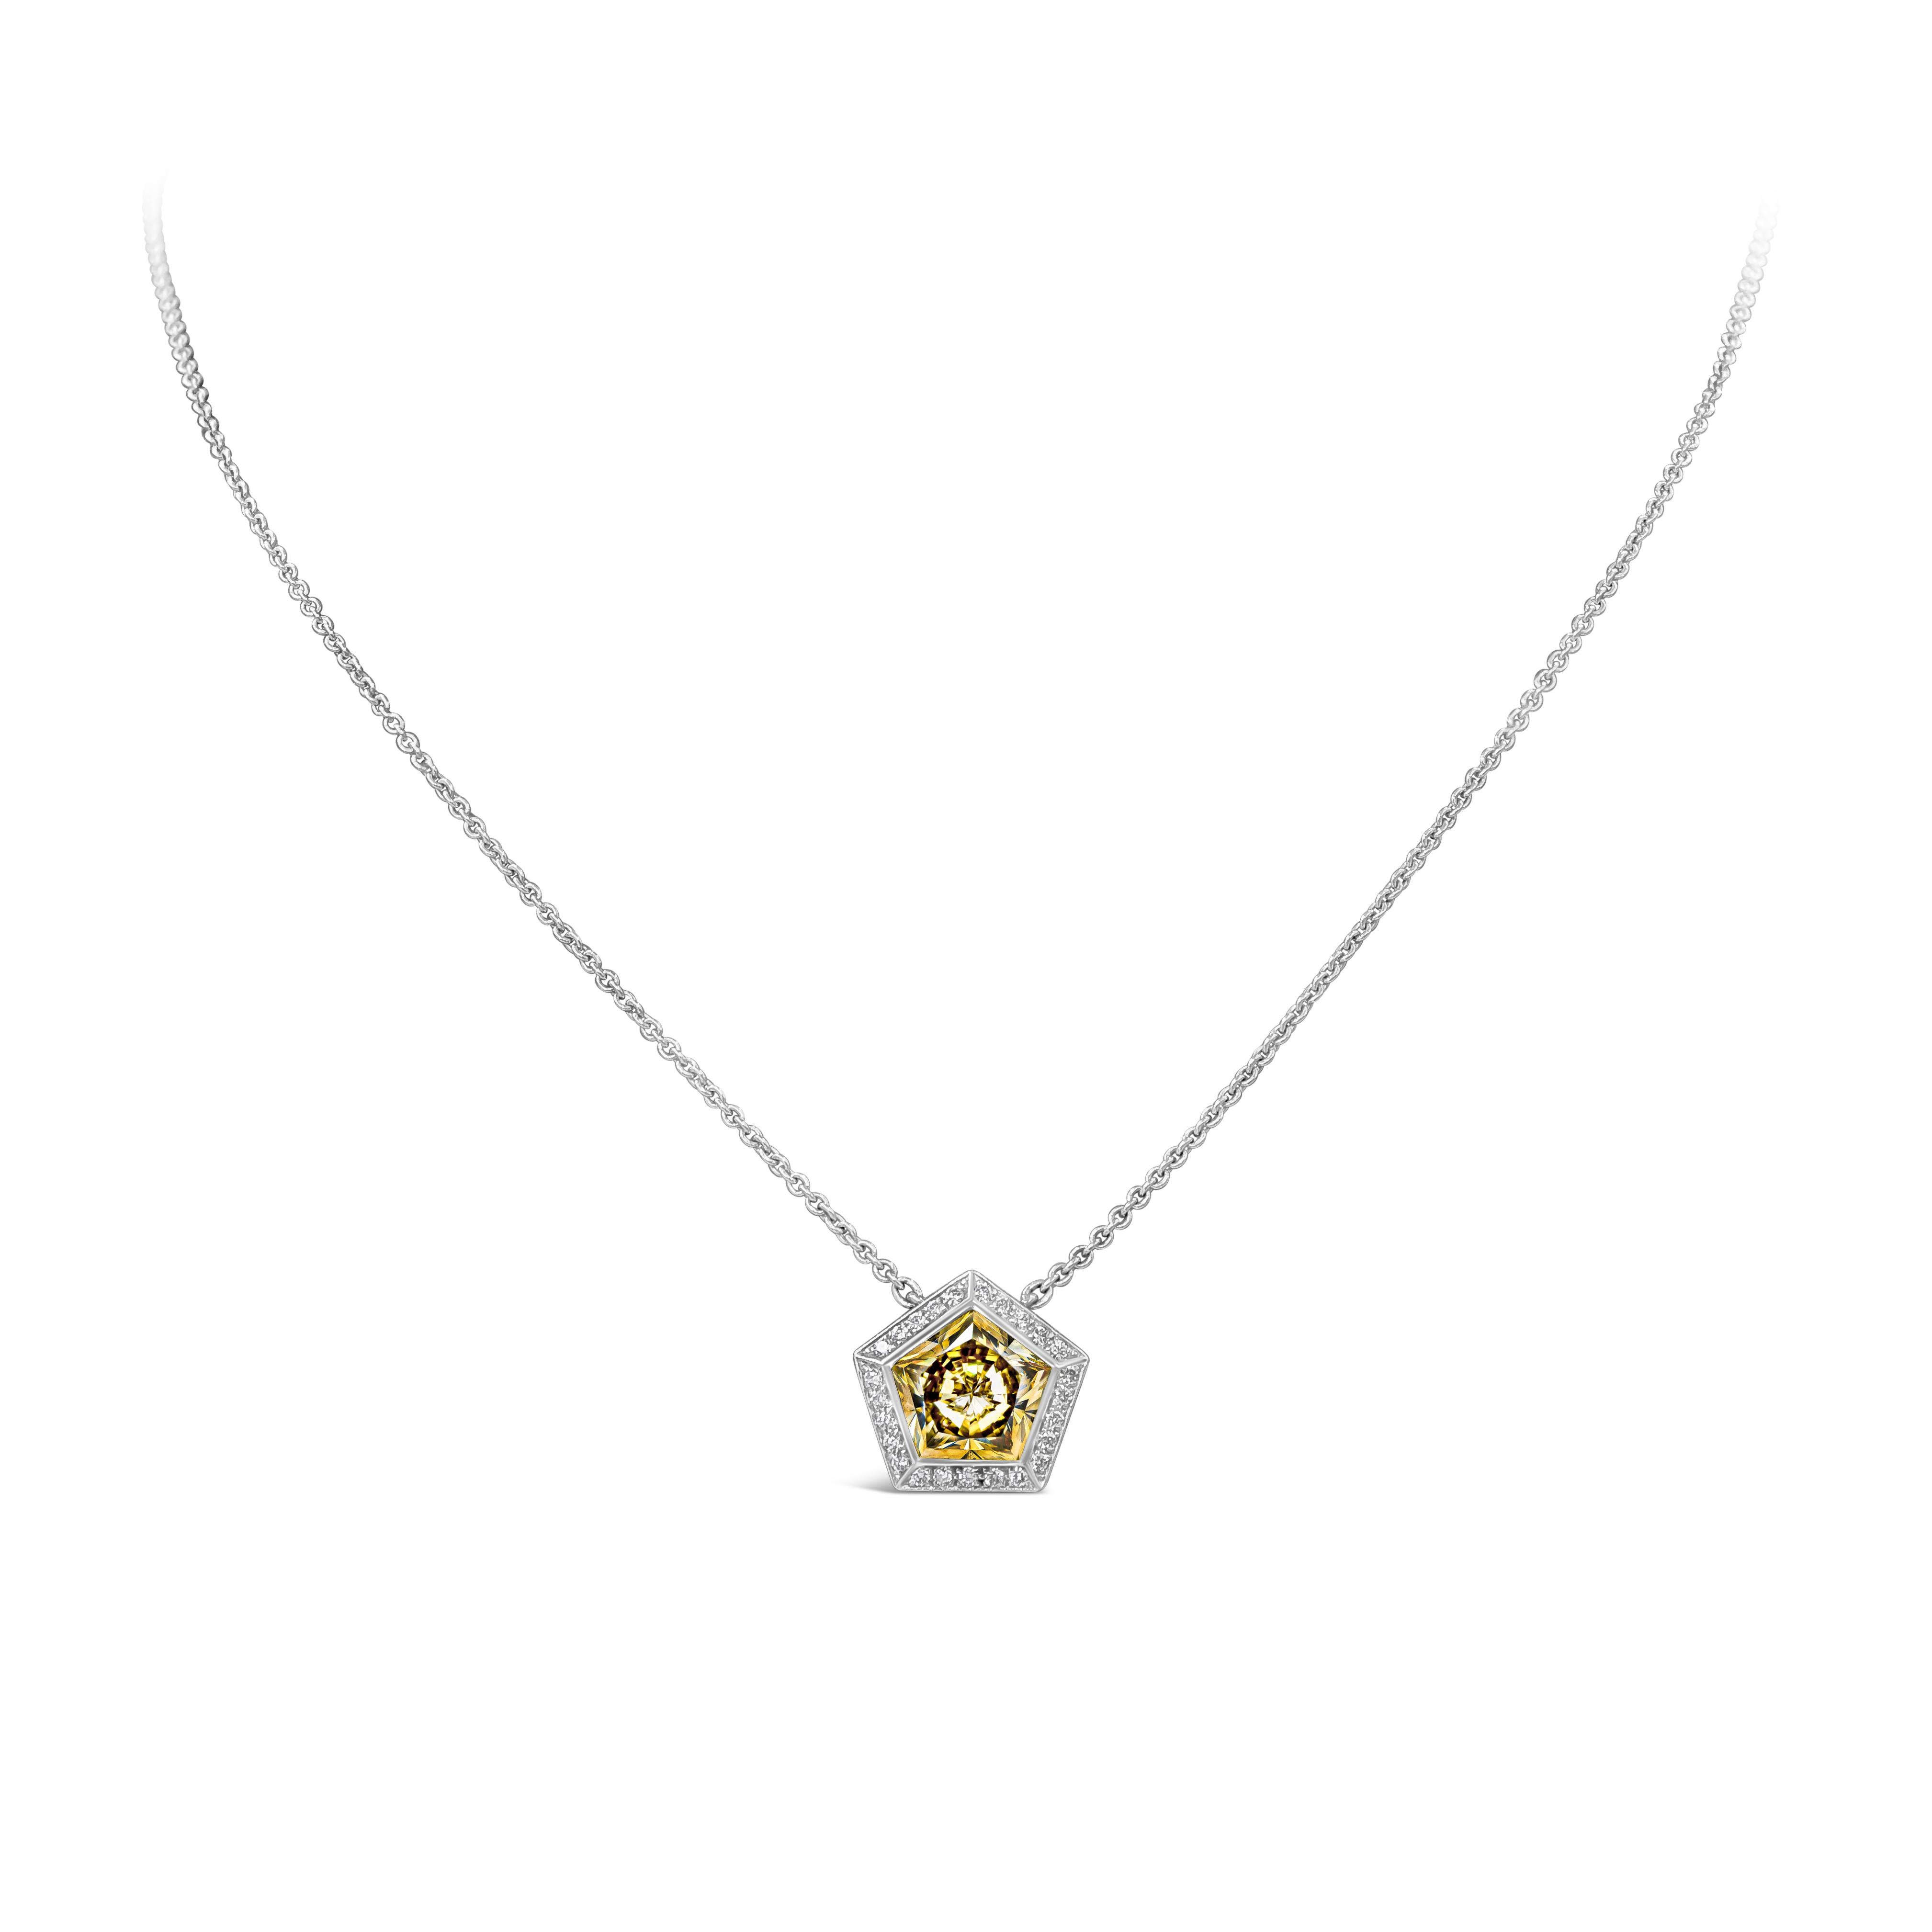 A stylish and unique pendant necklace showcasing a pentagon cut yellow diamond weighing 2.13 carats, set in a halo of round brilliant diamonds weighing 0.15 carats in total. Attached to an 18 inches adjustable white gold chain and Finely made in 18k